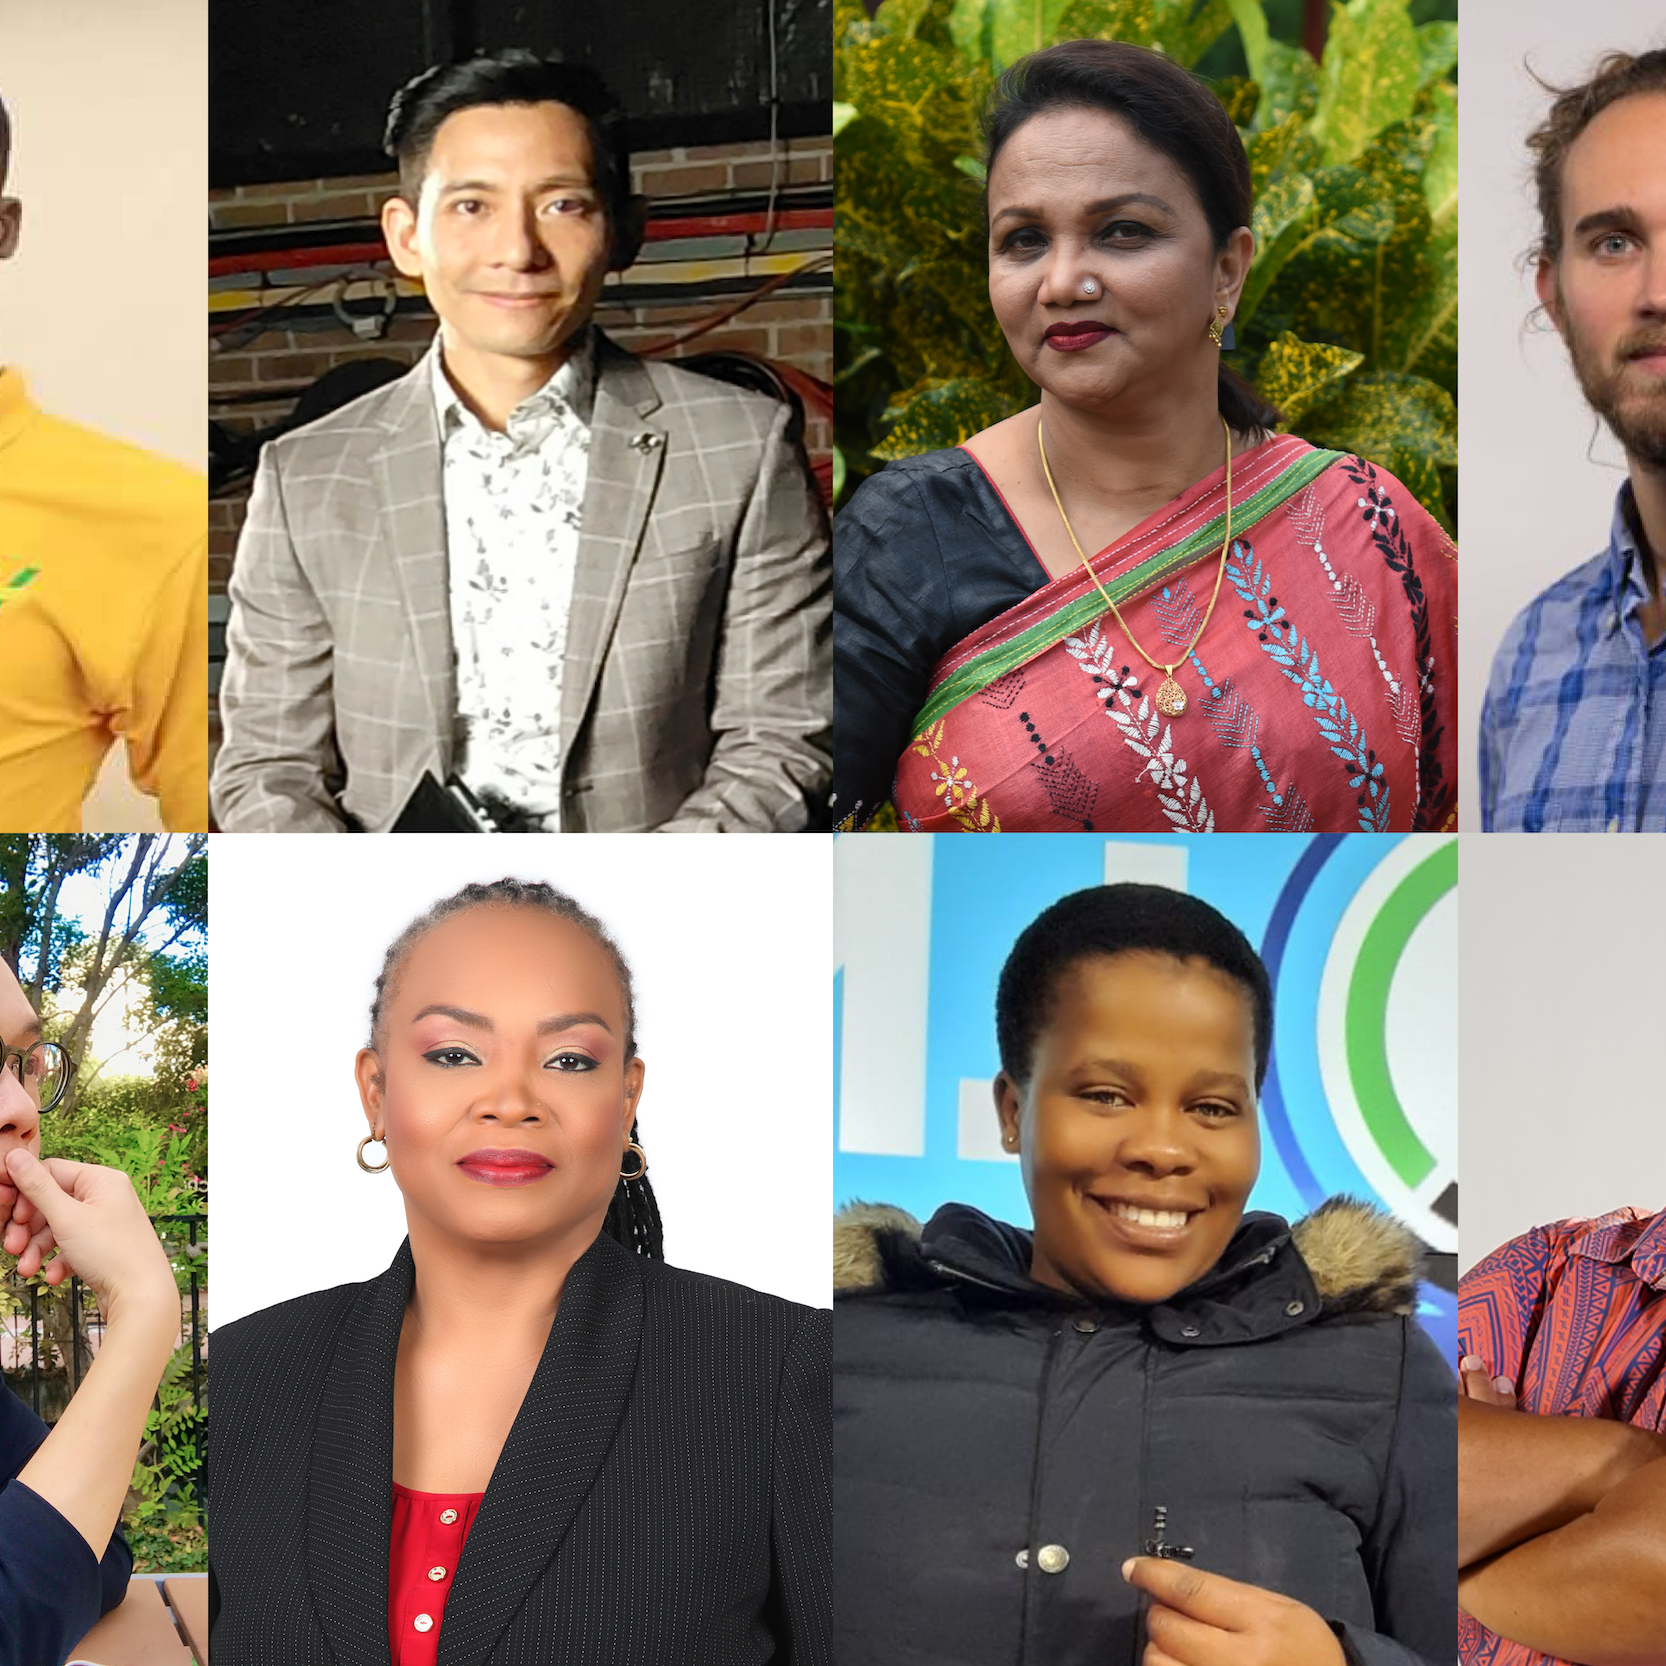 Headshots of the successful recipients of this year's Global Grants.